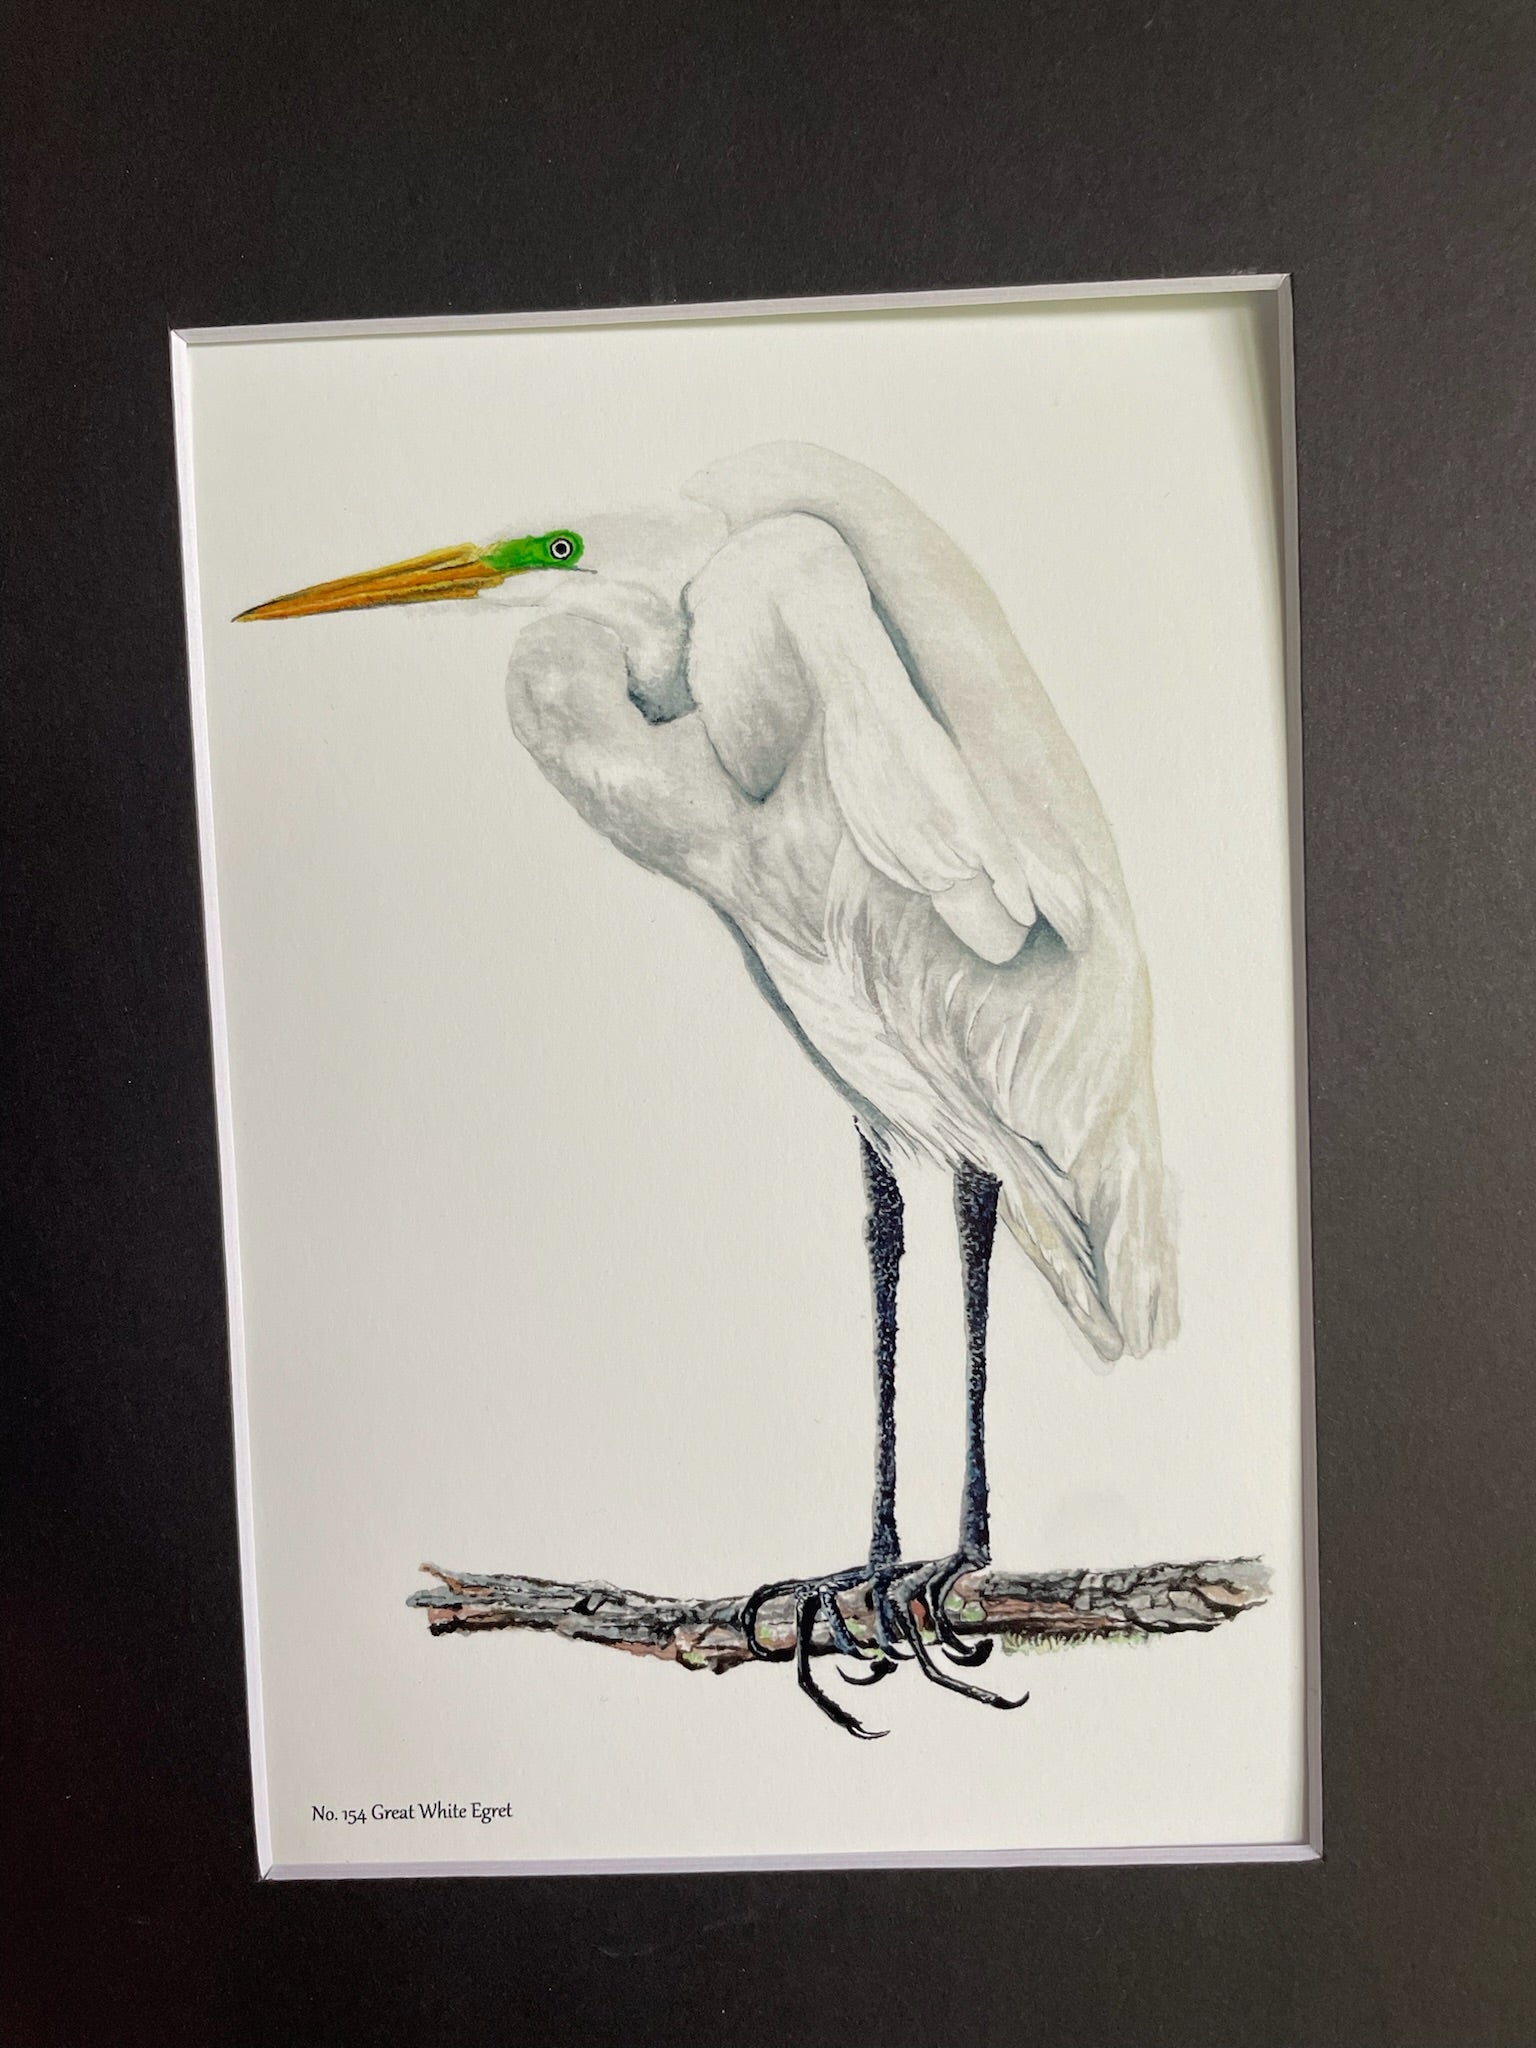 Great White Egret - Bird Art by KB - Giclee Print with Black Mat